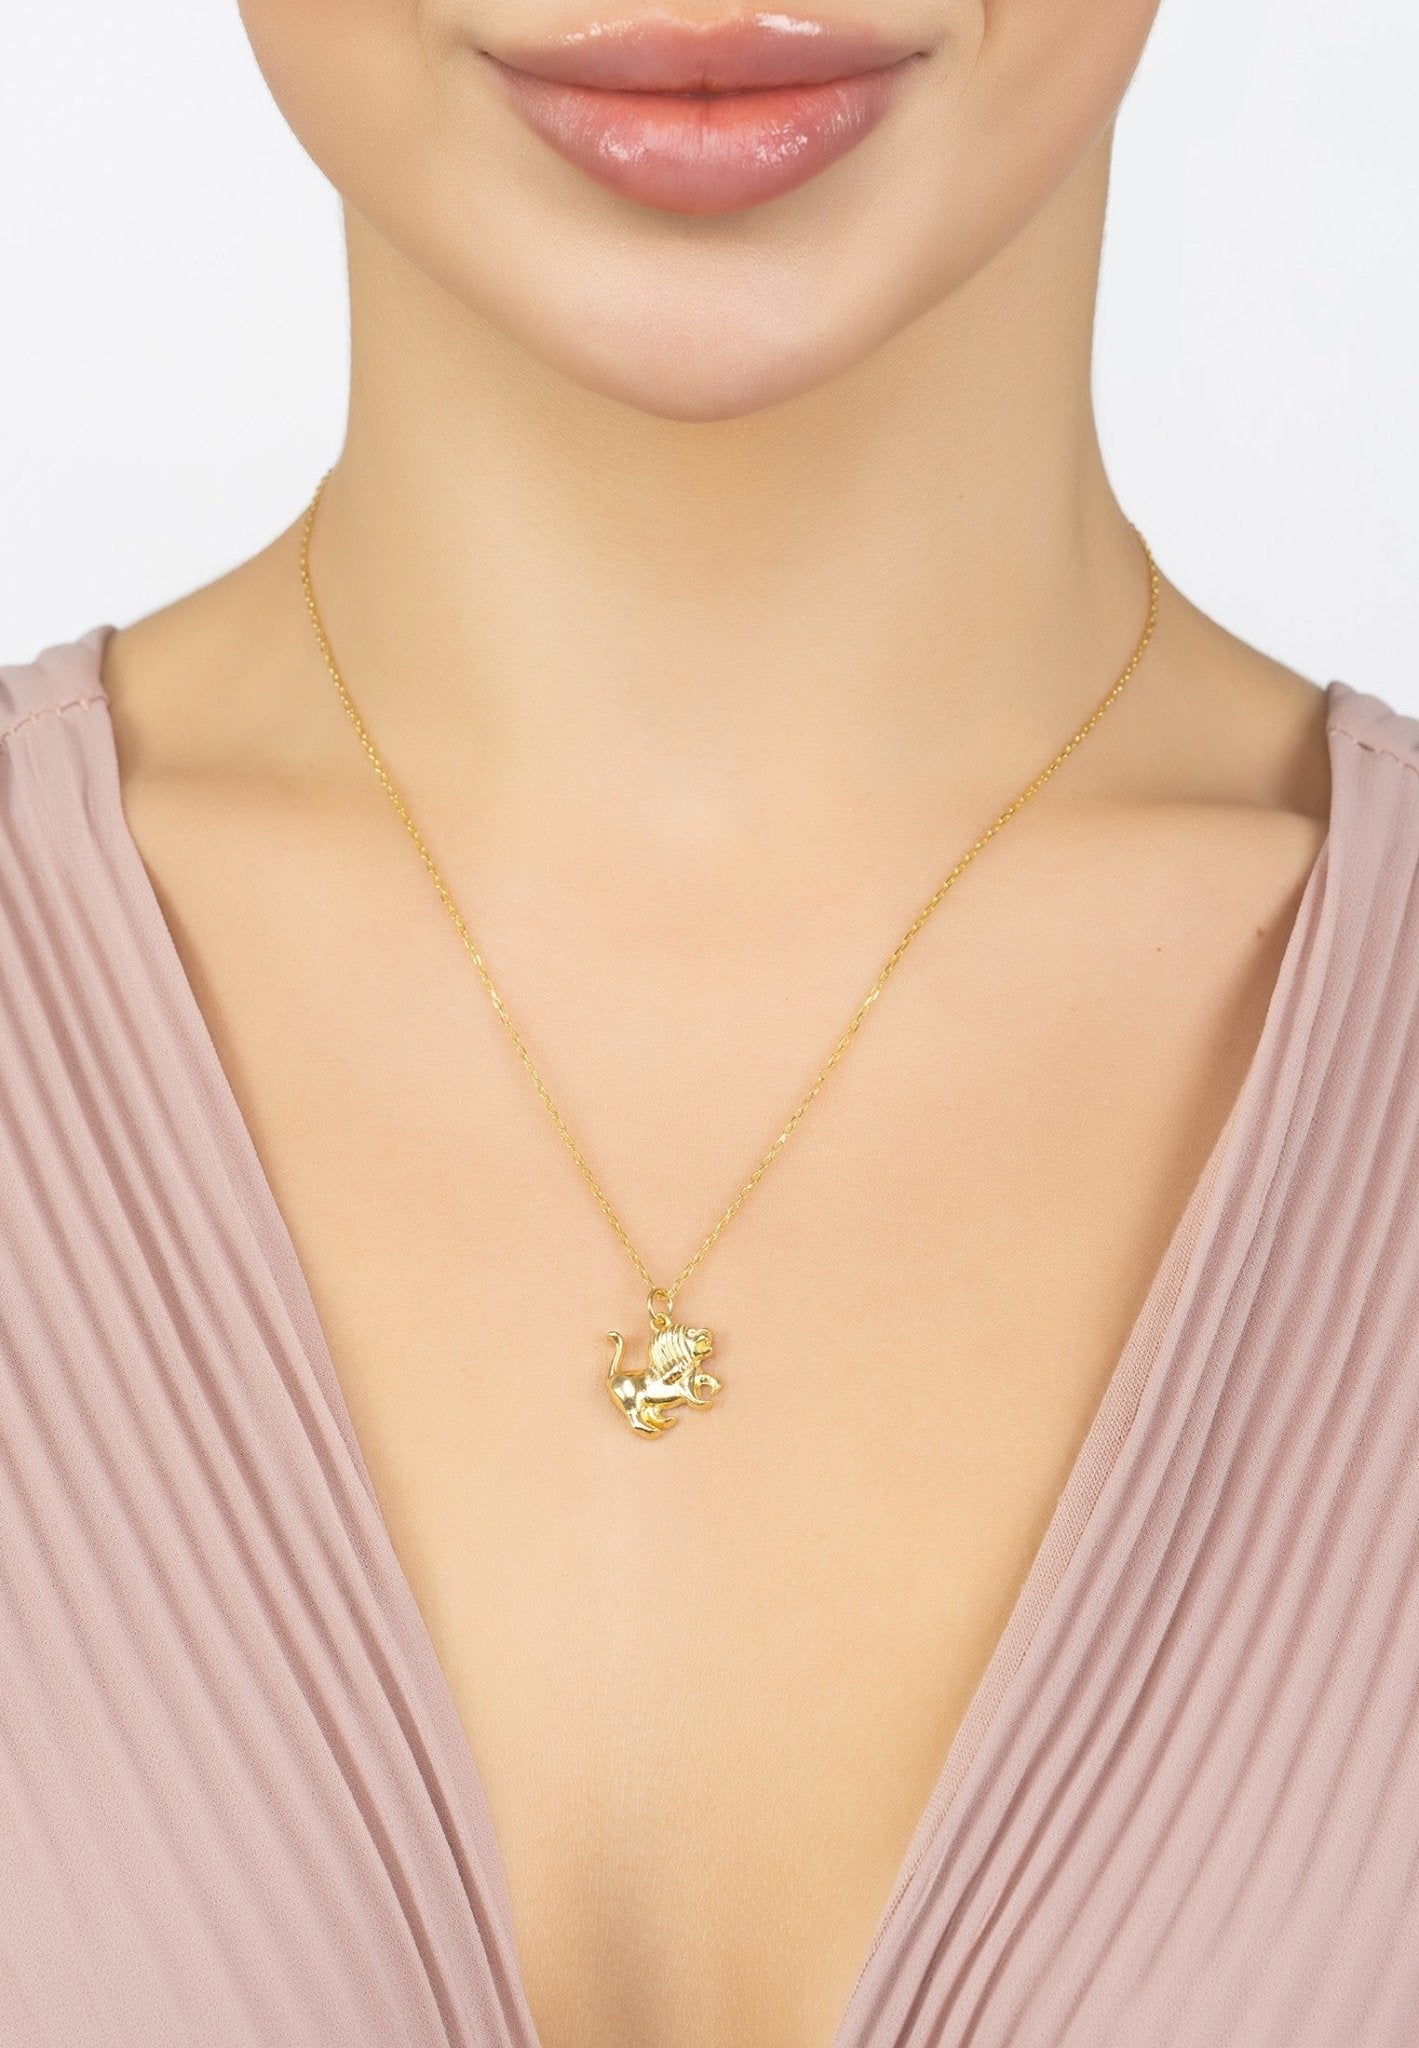 Personalized Necklaces - Zodiac Star Sign Necklace Gold Leo 